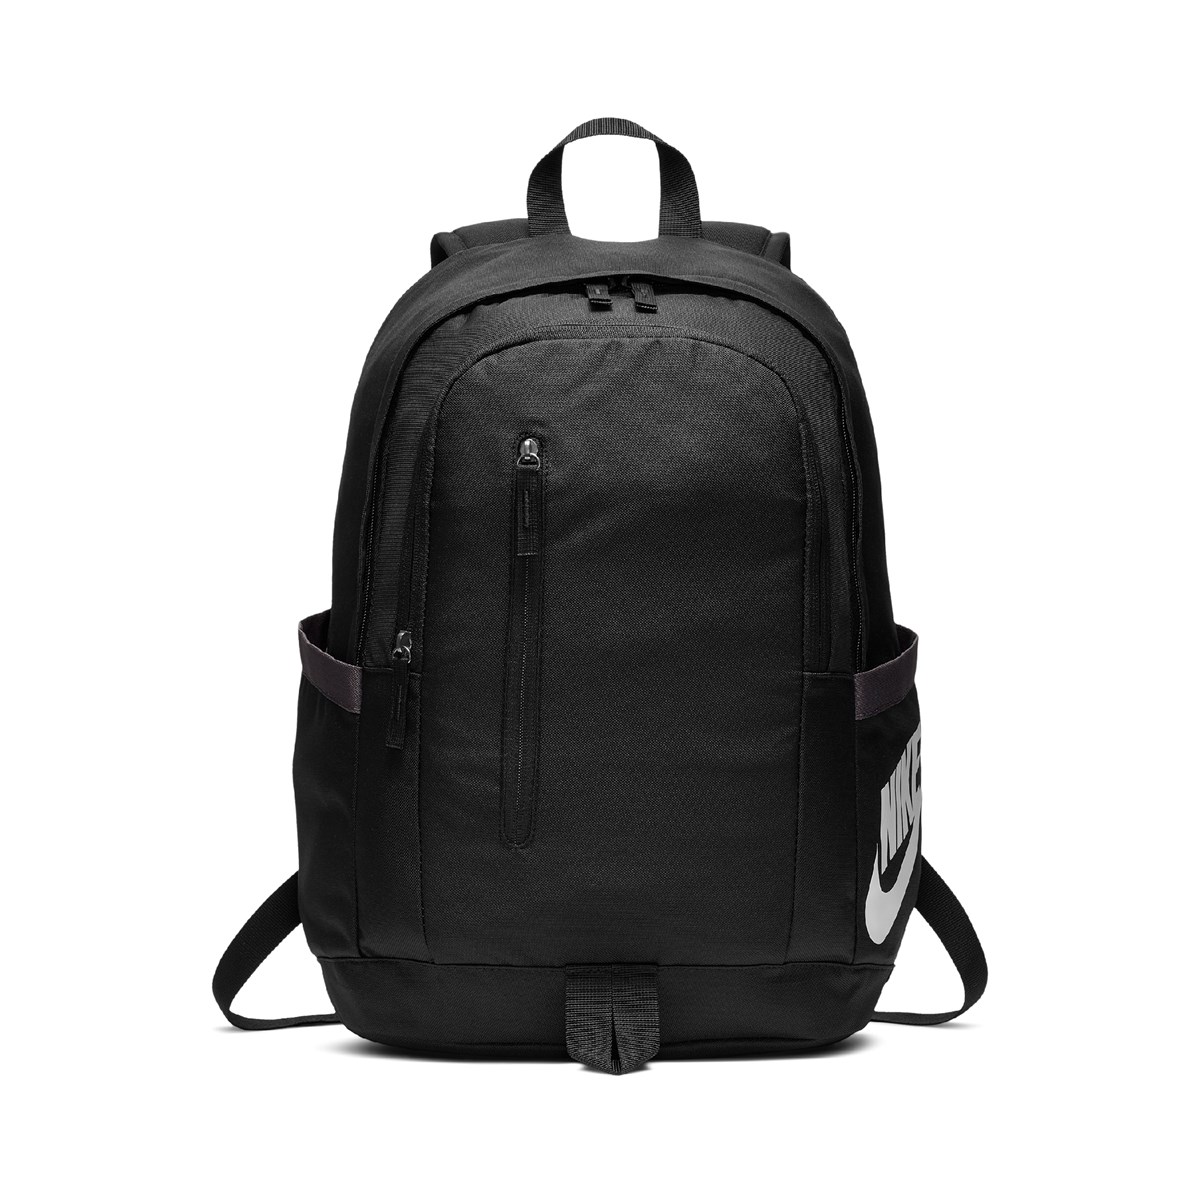 All Access Soleday Backpack in Black 